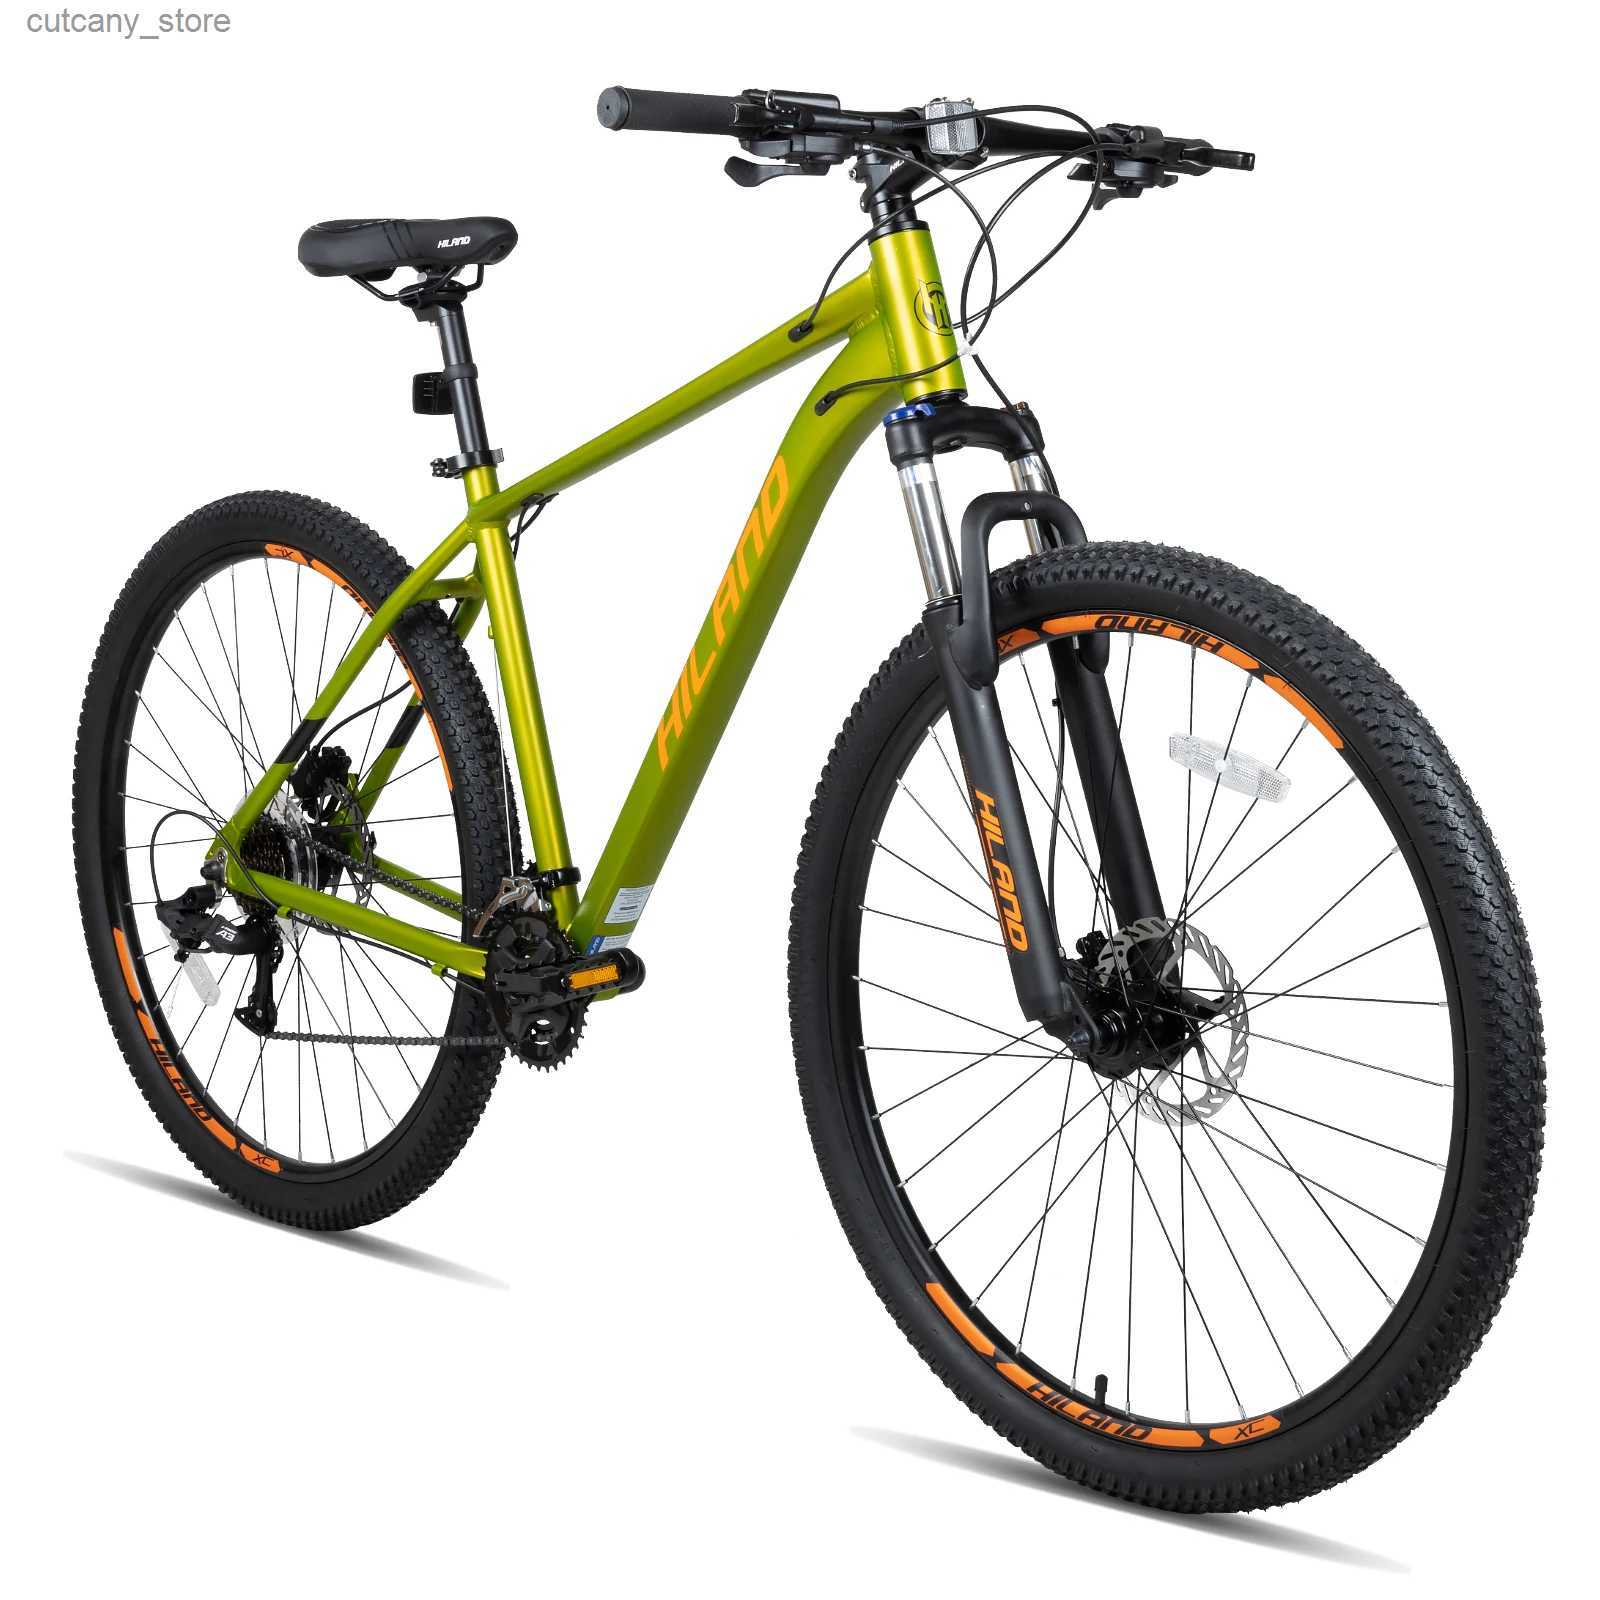 Bikes Ride-Ons Hiland 29 Inch Mountain Bike for Men Adult Bicyc Aluminum Hydraulic Disc-Brake 16-Speed with Lock-Out Suspension Fork MTB L240319